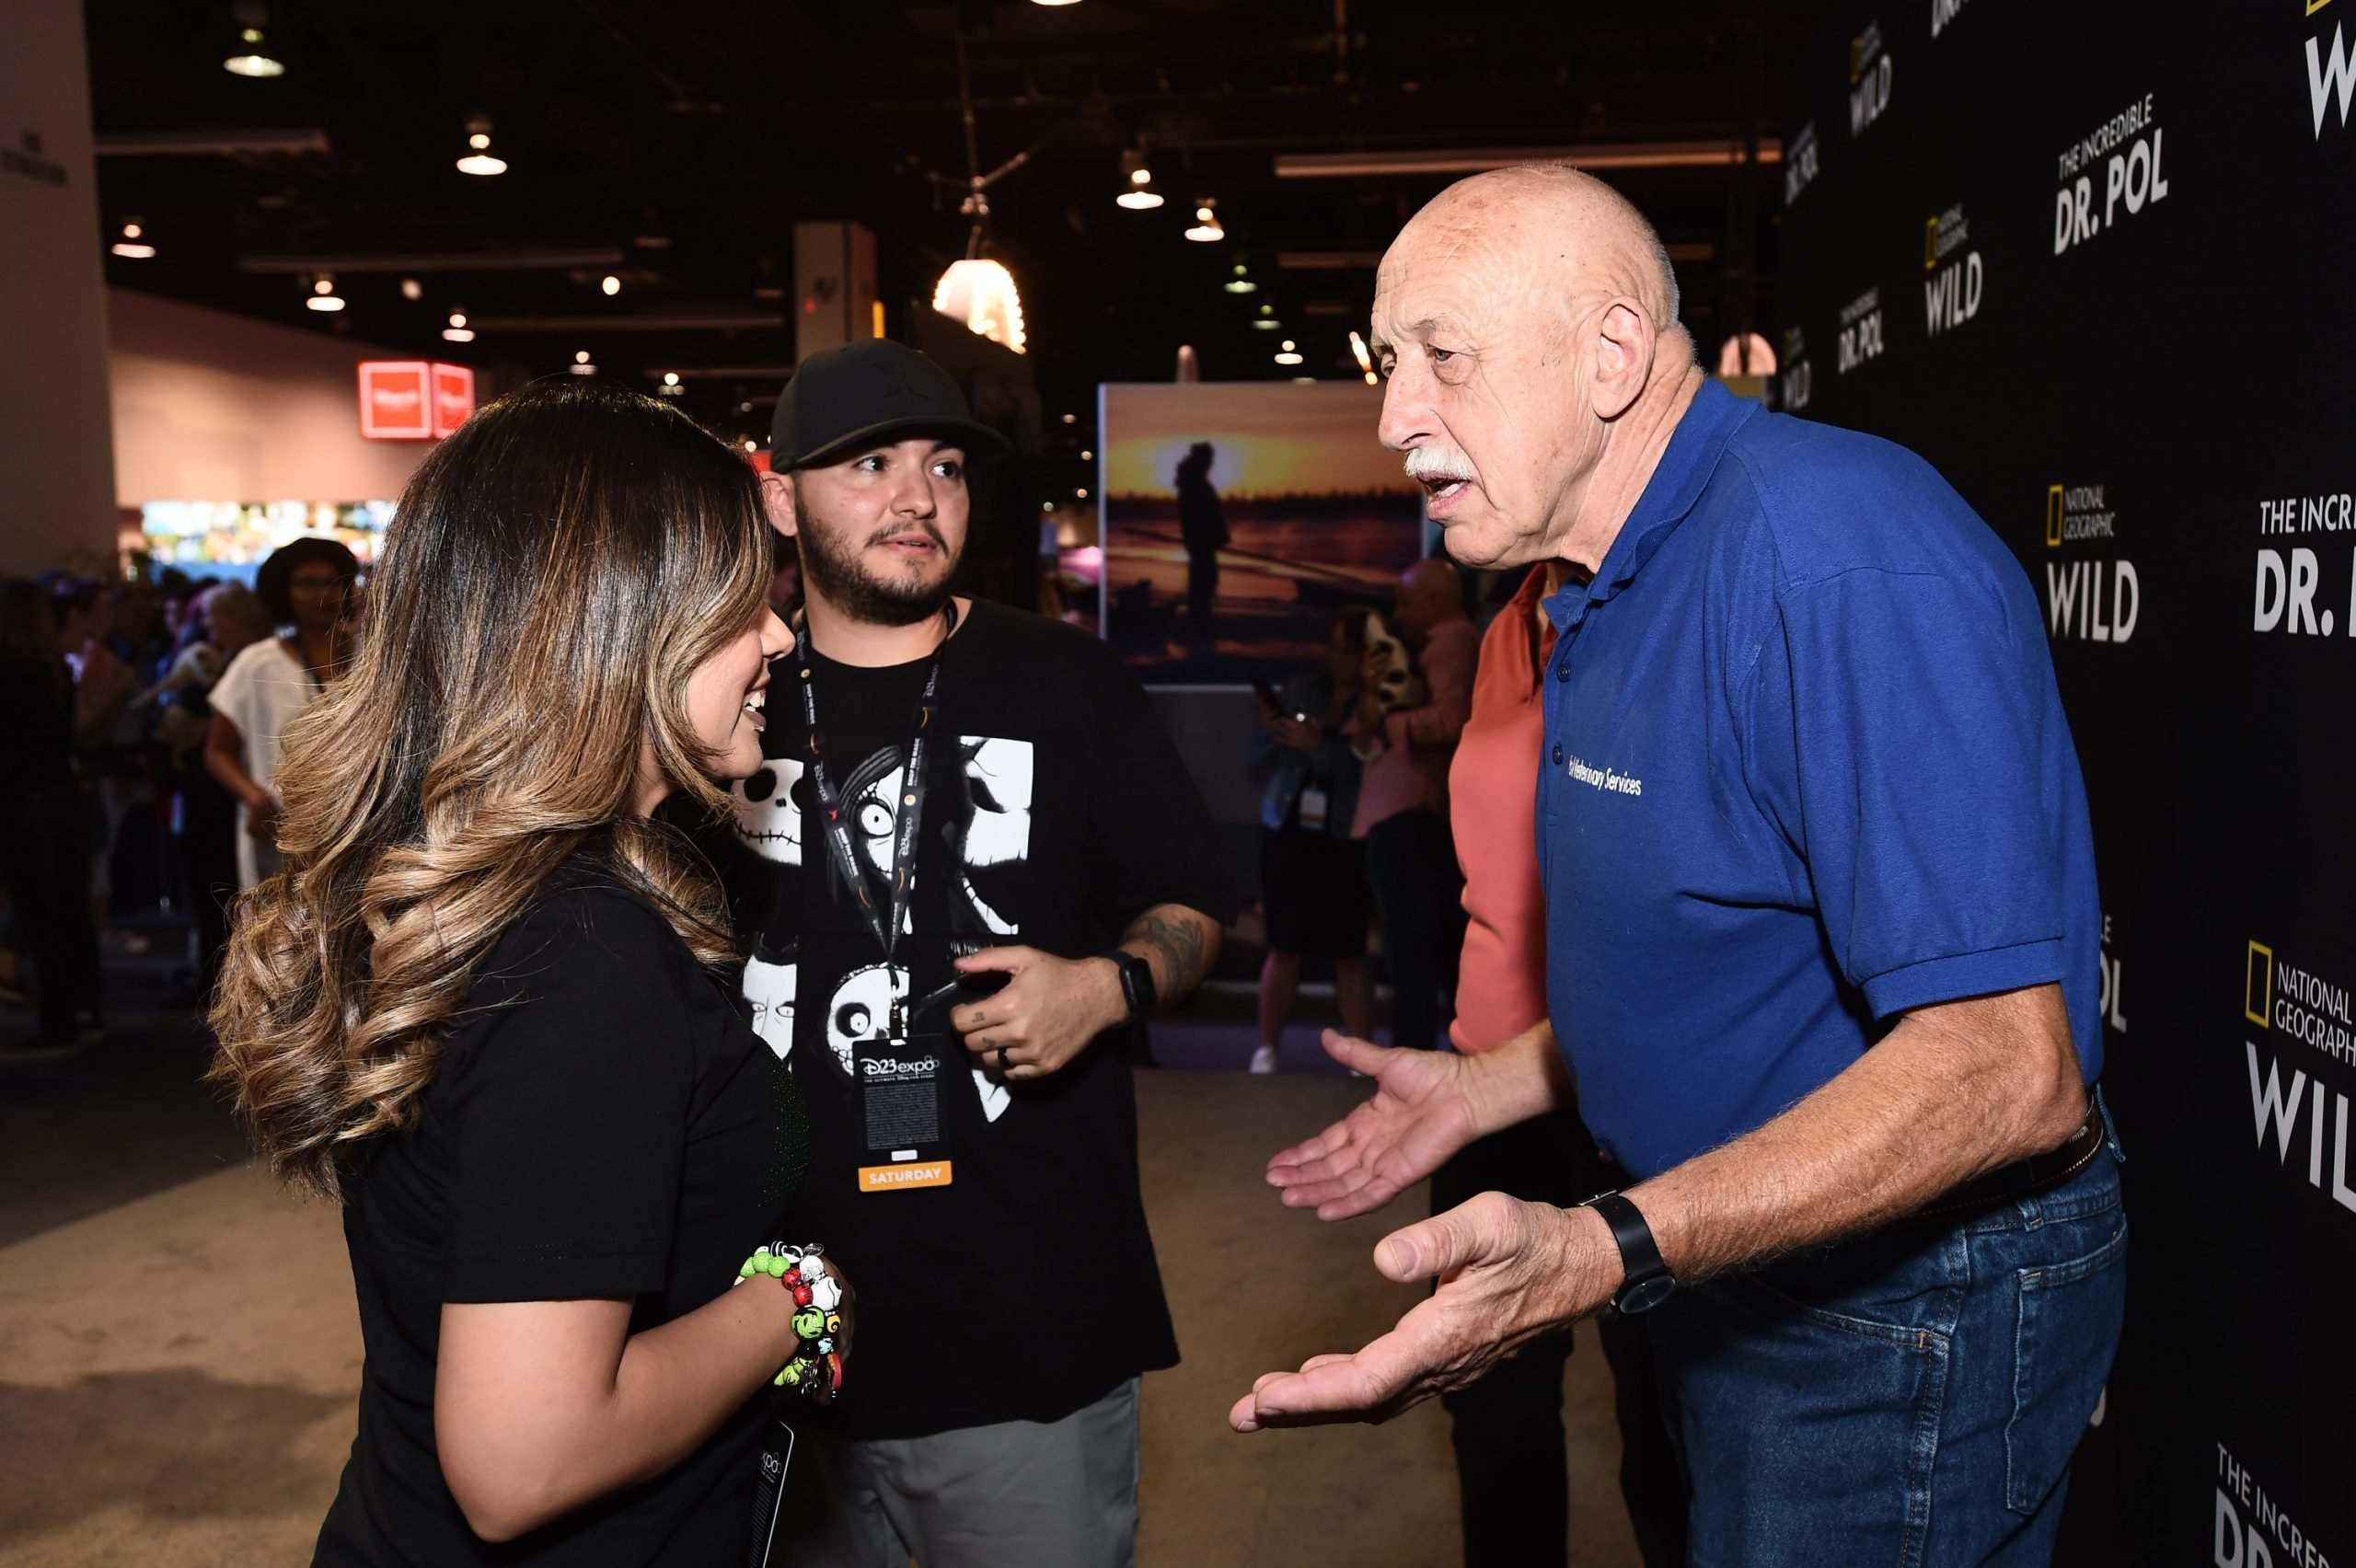 Dr. Jan Pol, right, of 'The Incredible Dr. Pol, meets fans at an Ultimate Disney Fan Event, 2019